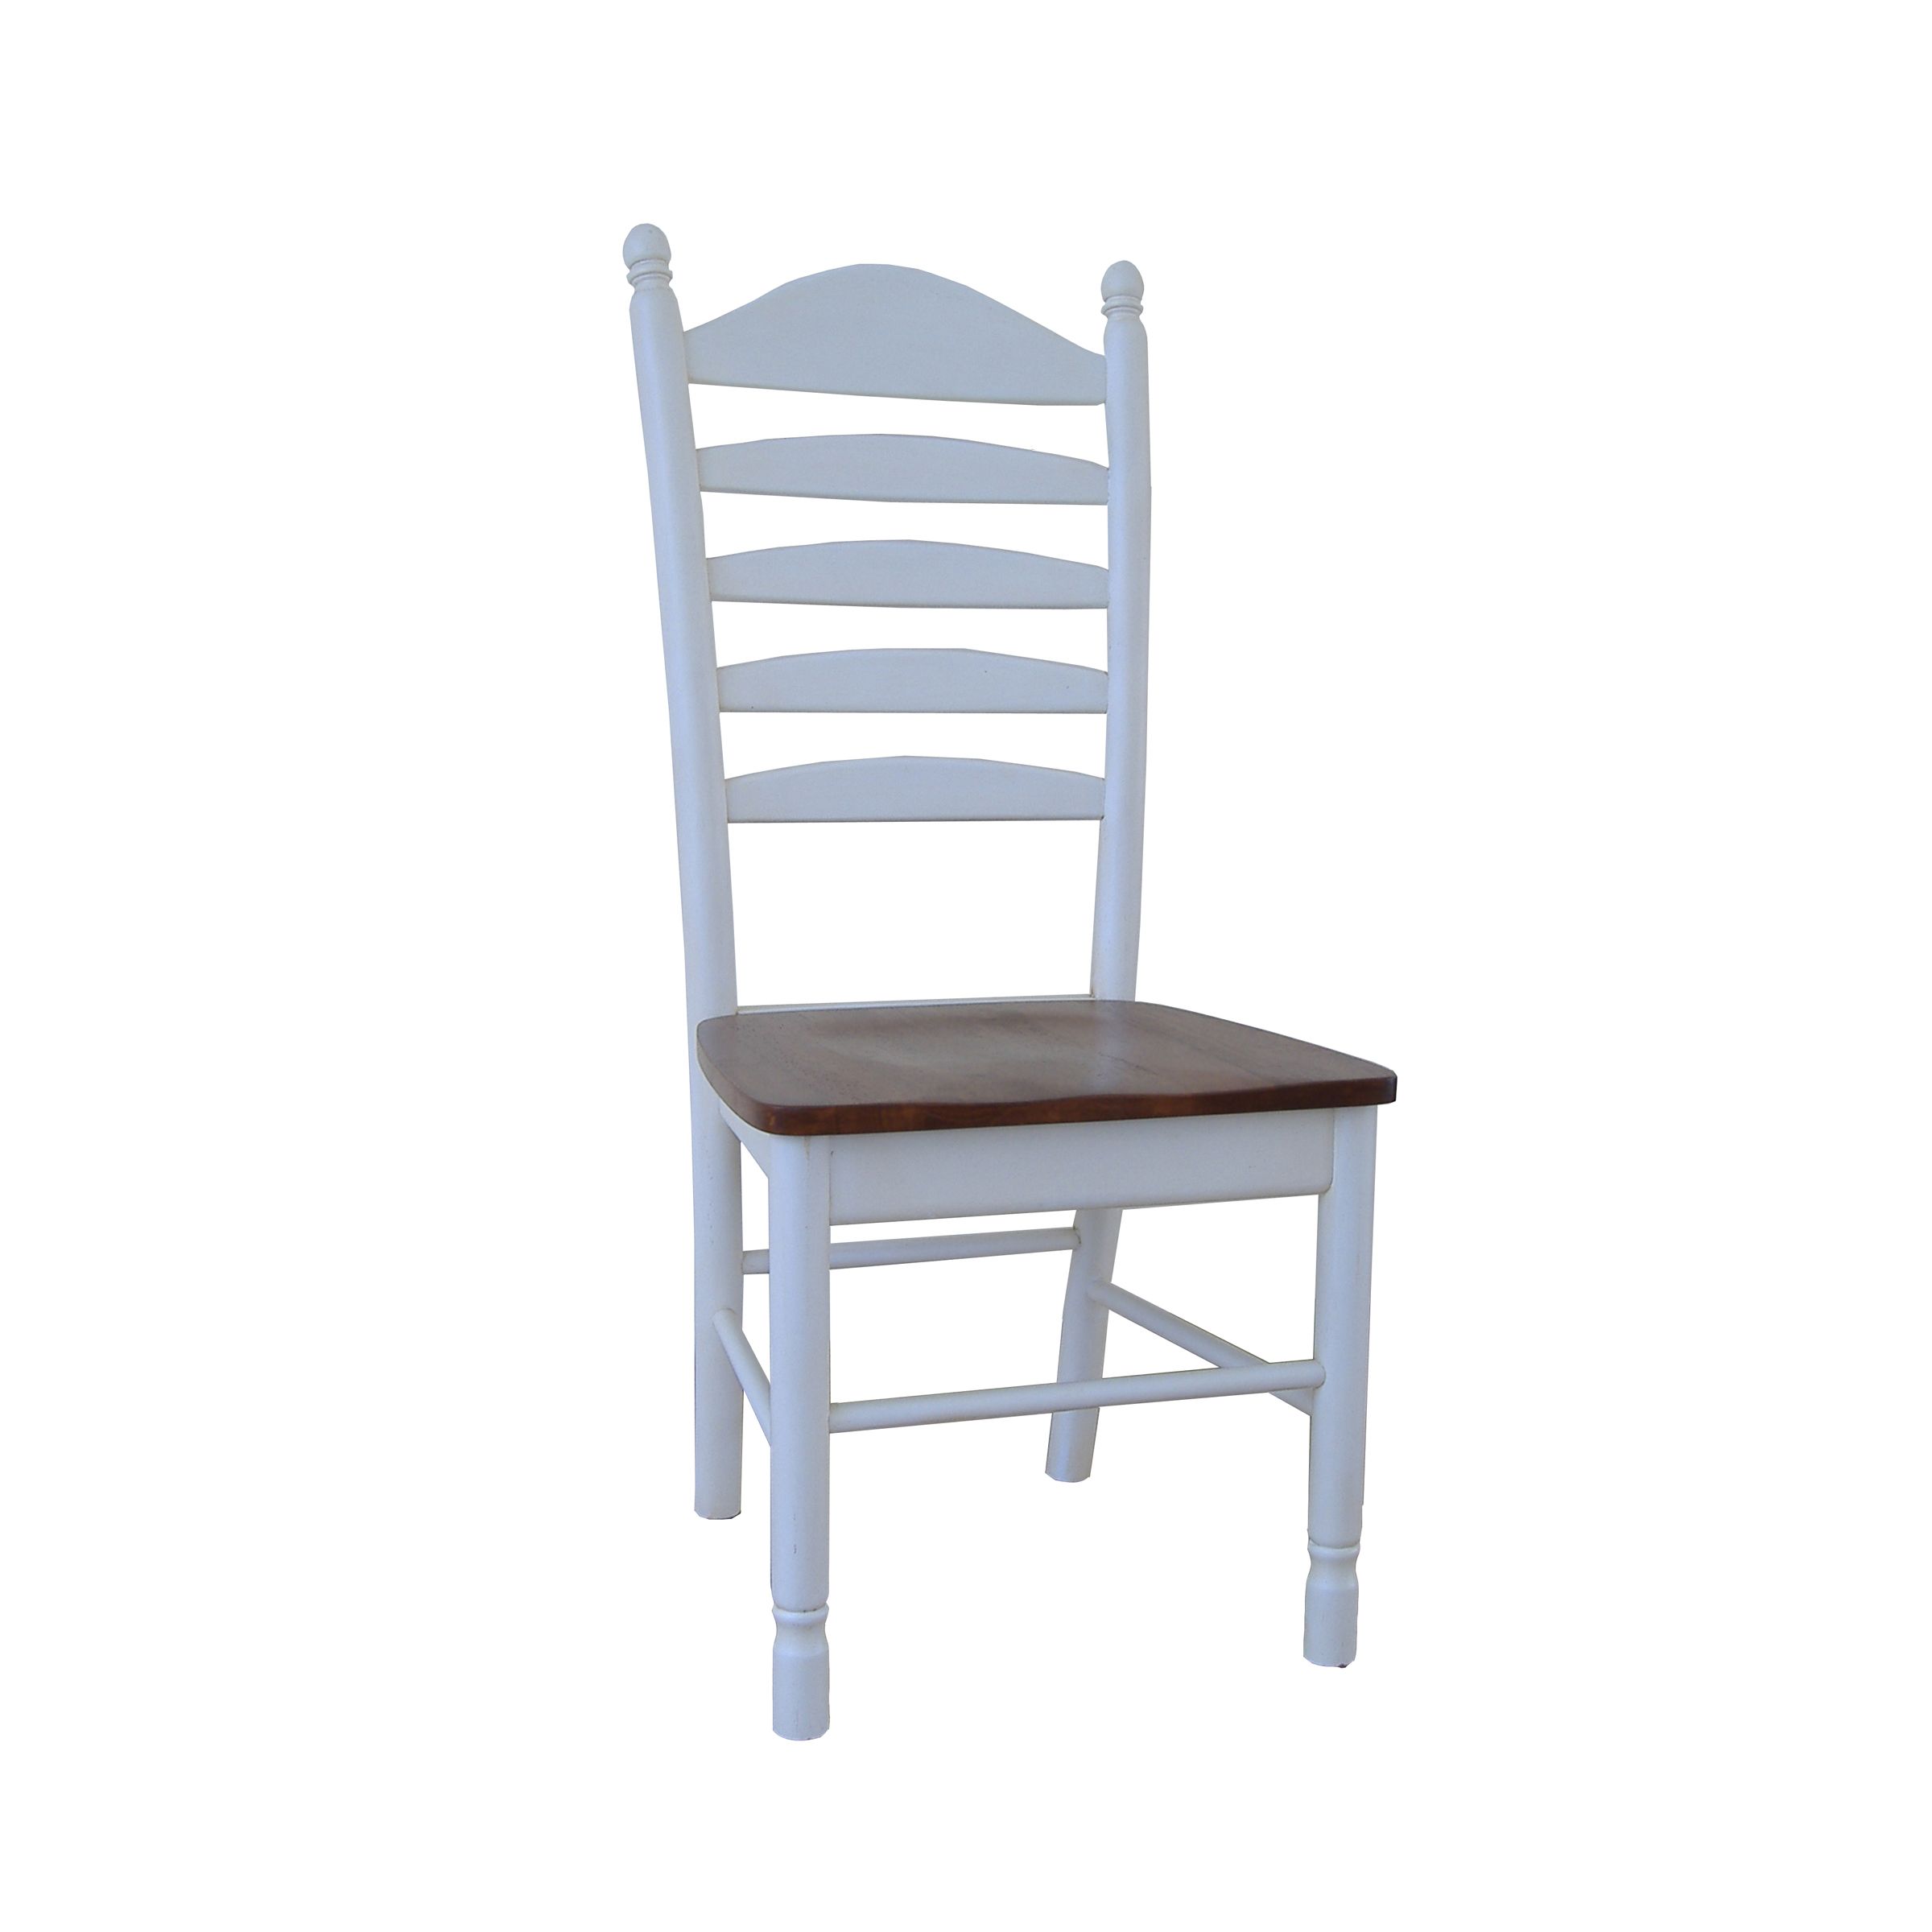 International Concepts Pair of Madison Park Ladder Back Chair